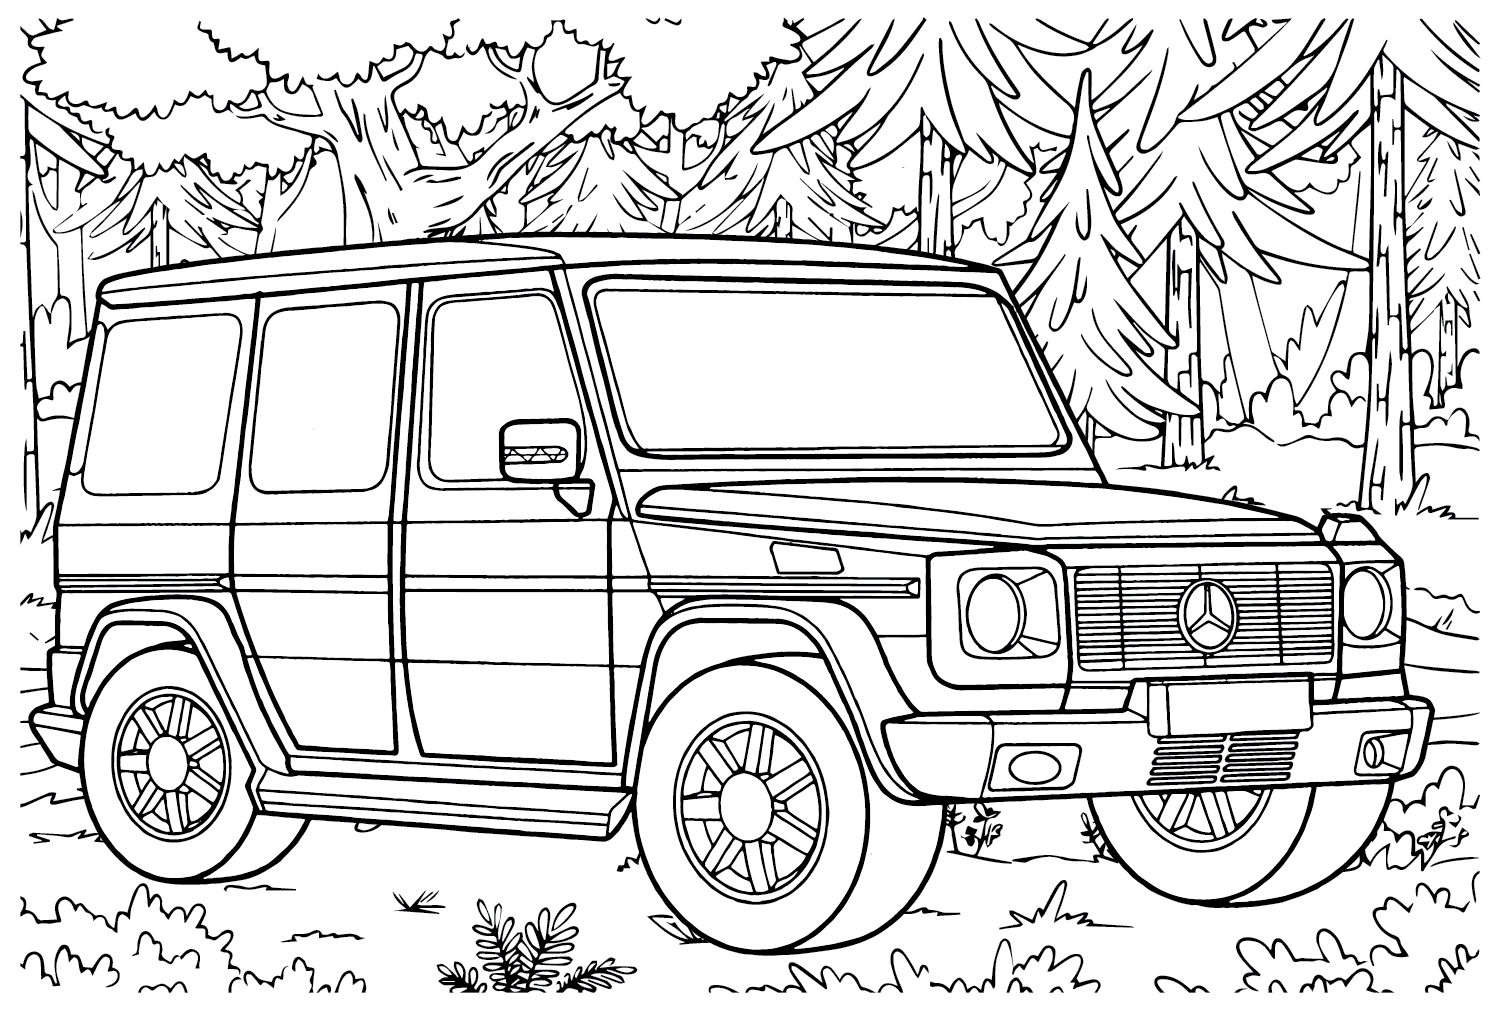 Mercedes Gelendvagen Coloring Page from Mercedes-Benz